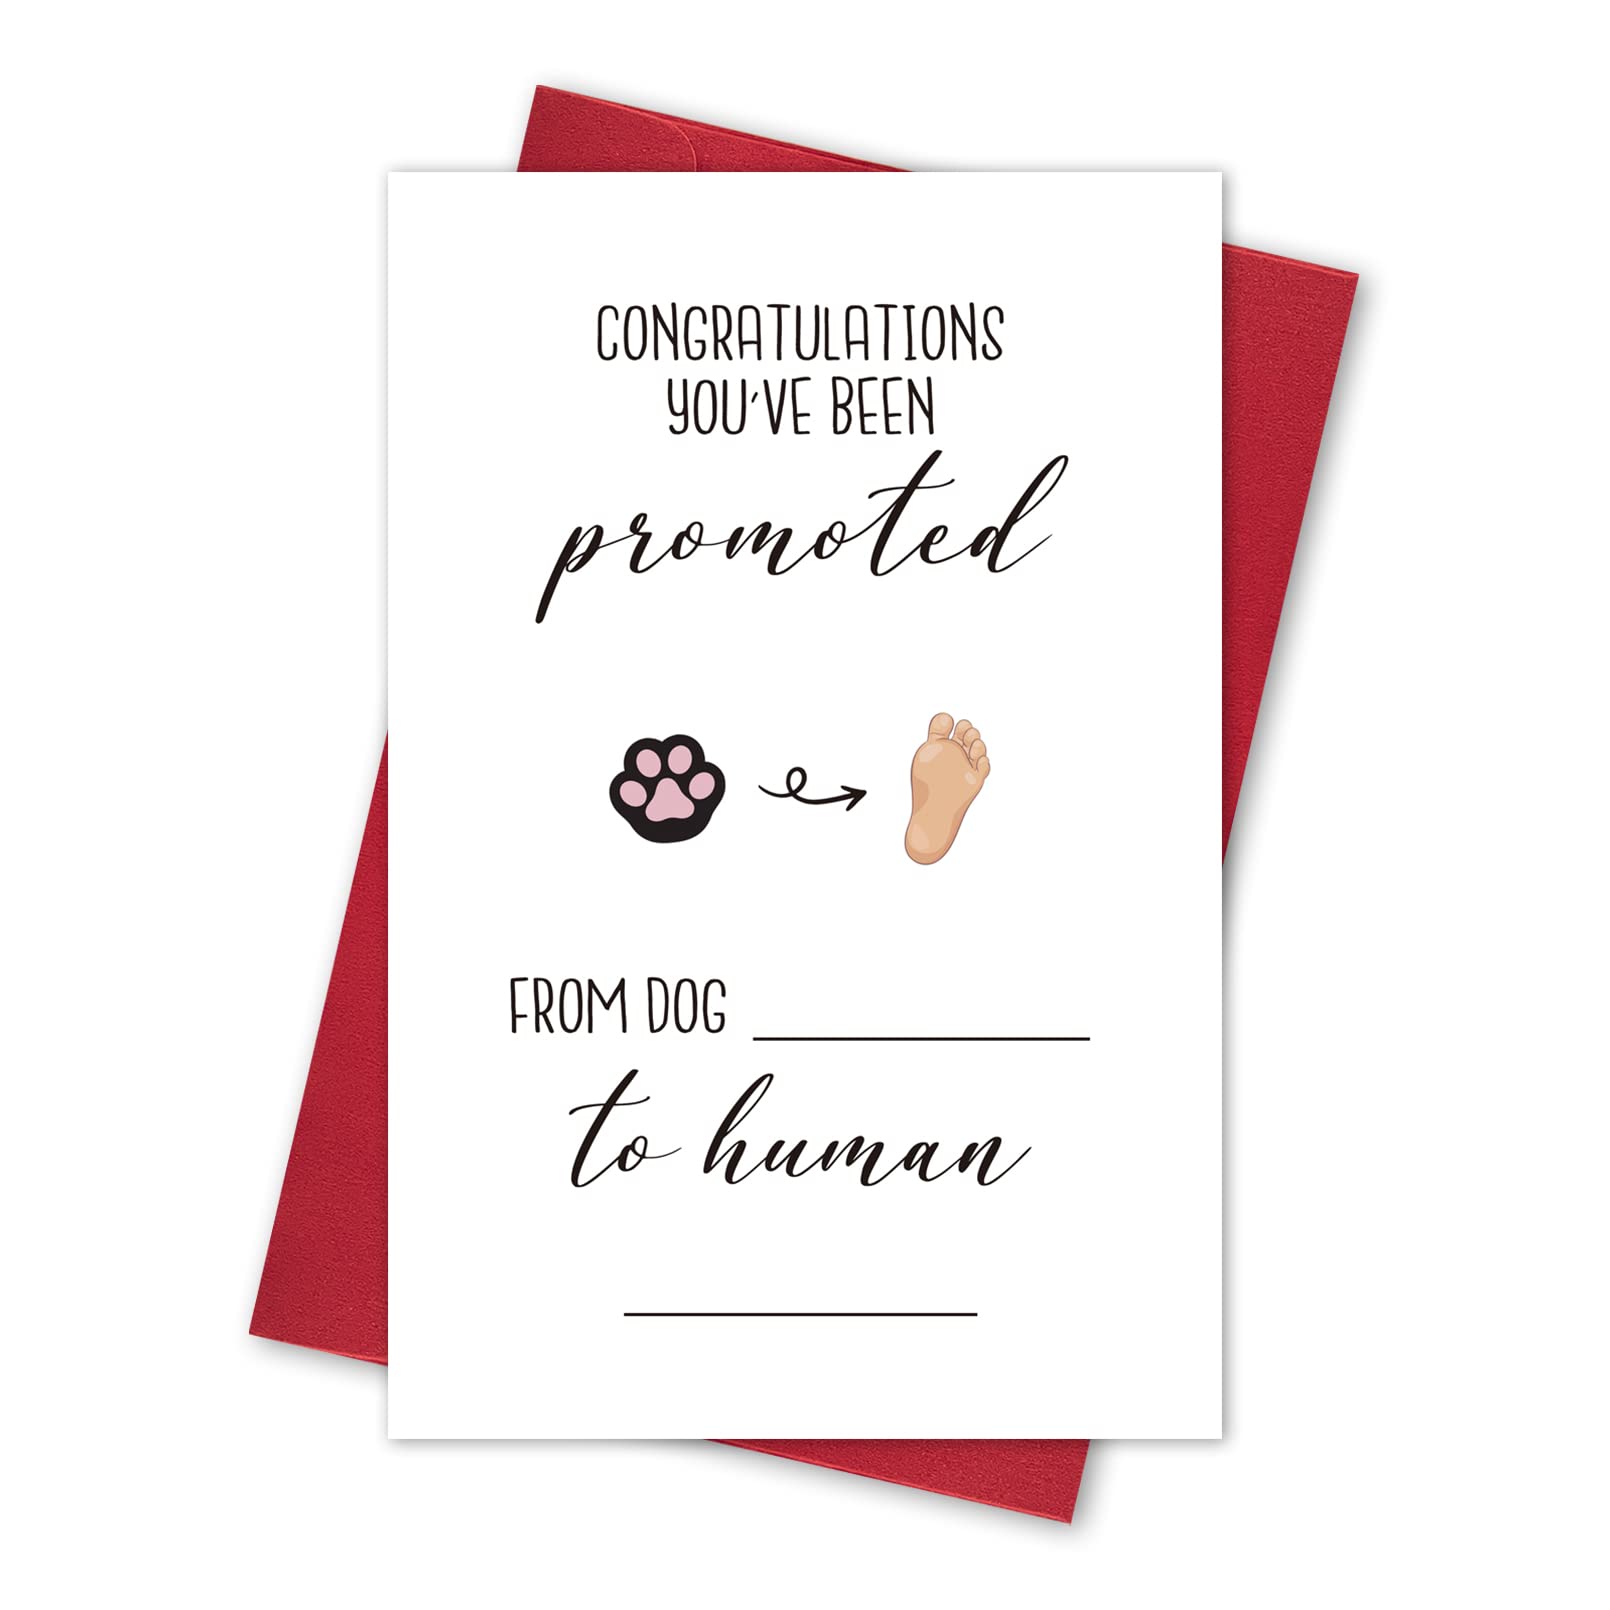 Joukfun Funny Pregnancy Announcement Card, Fill in The Blanks Pregnancy Reveal Card for Grandparents Dad, Promoted from Dog Grandparents to Human Grandparents, Baby Announcement Card